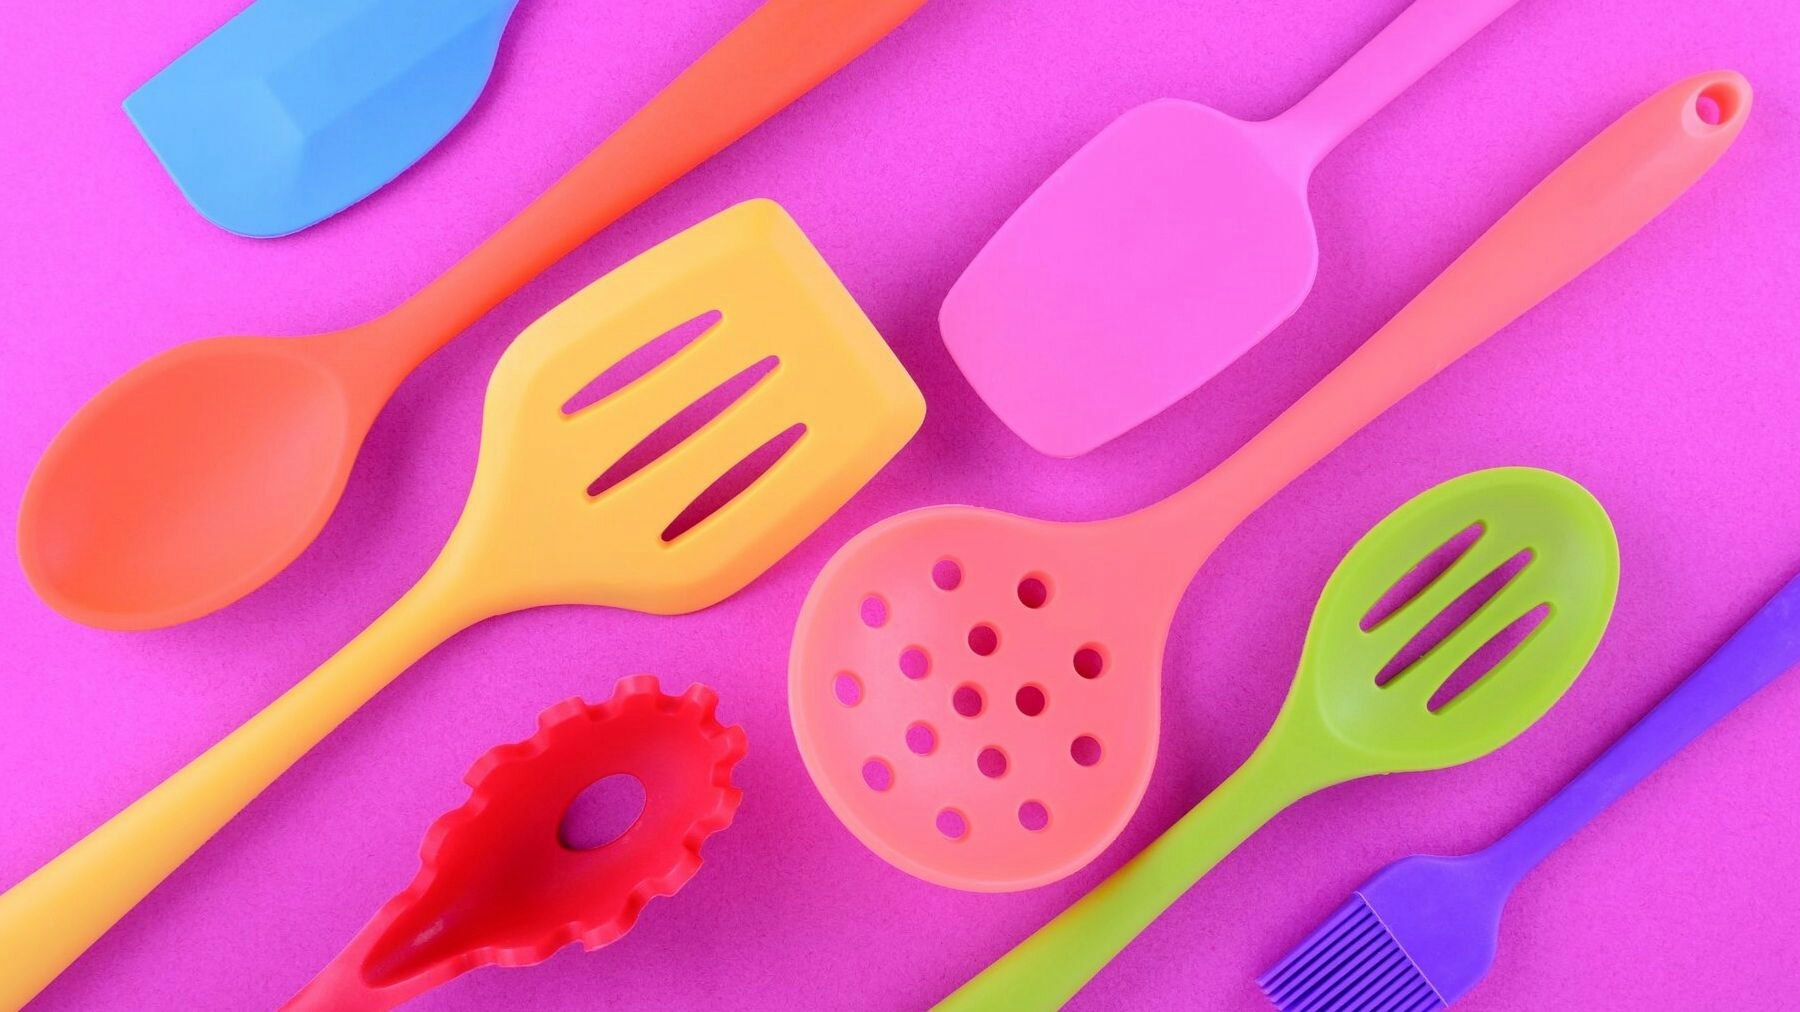 Silicone cooking utensils